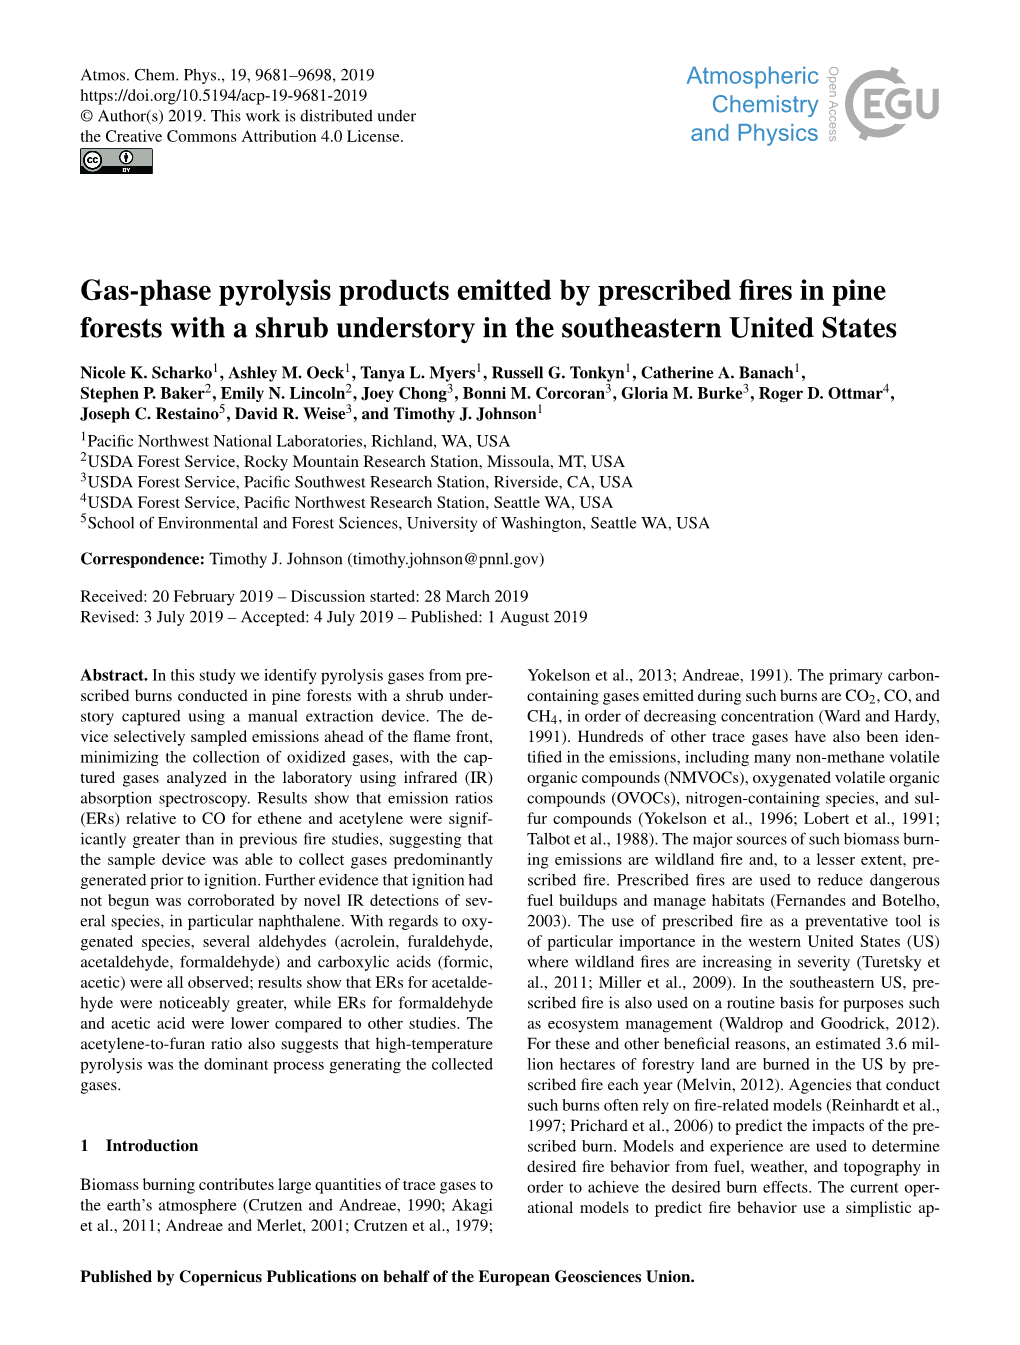 Gas-Phase Pyrolysis Products Emitted by Prescribed ﬁres in Pine Forests with a Shrub Understory in the Southeastern United States